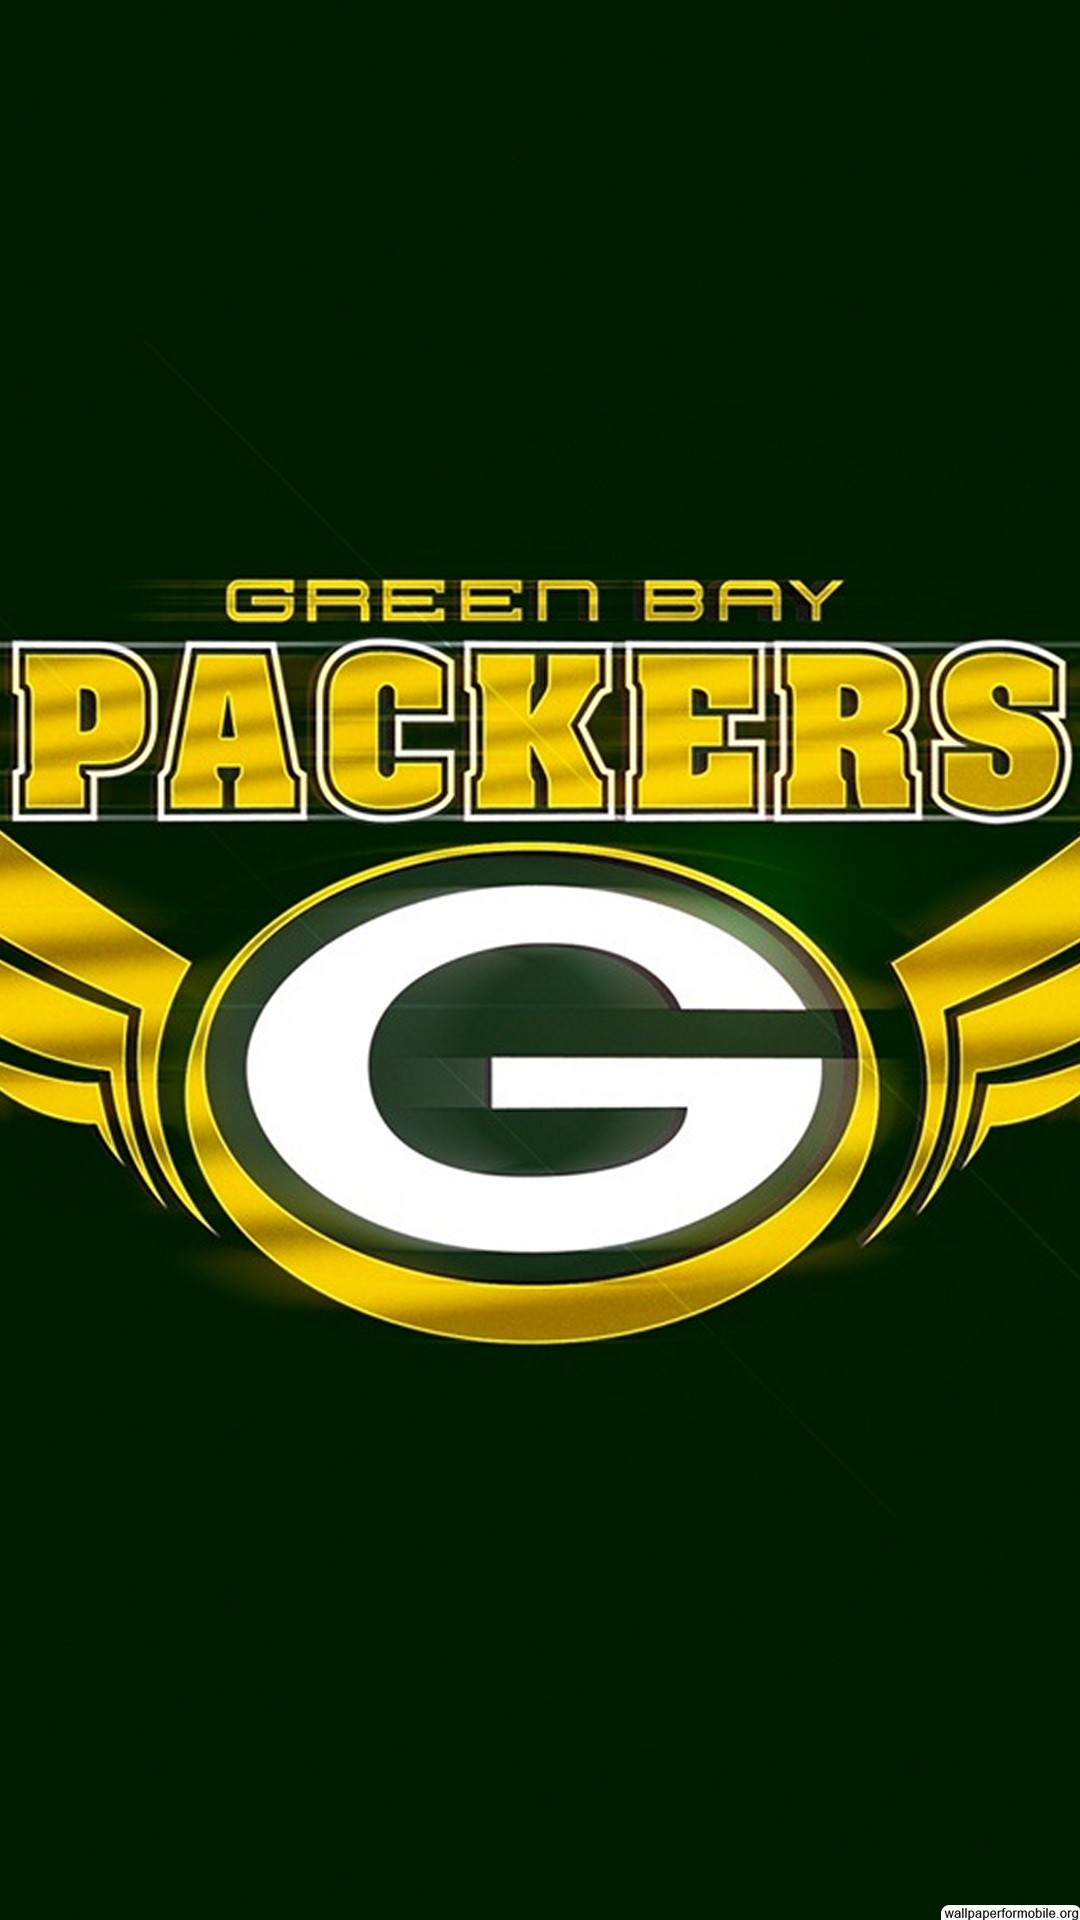 I made a Packers wallpaper for you guys  rGreenBayPackers